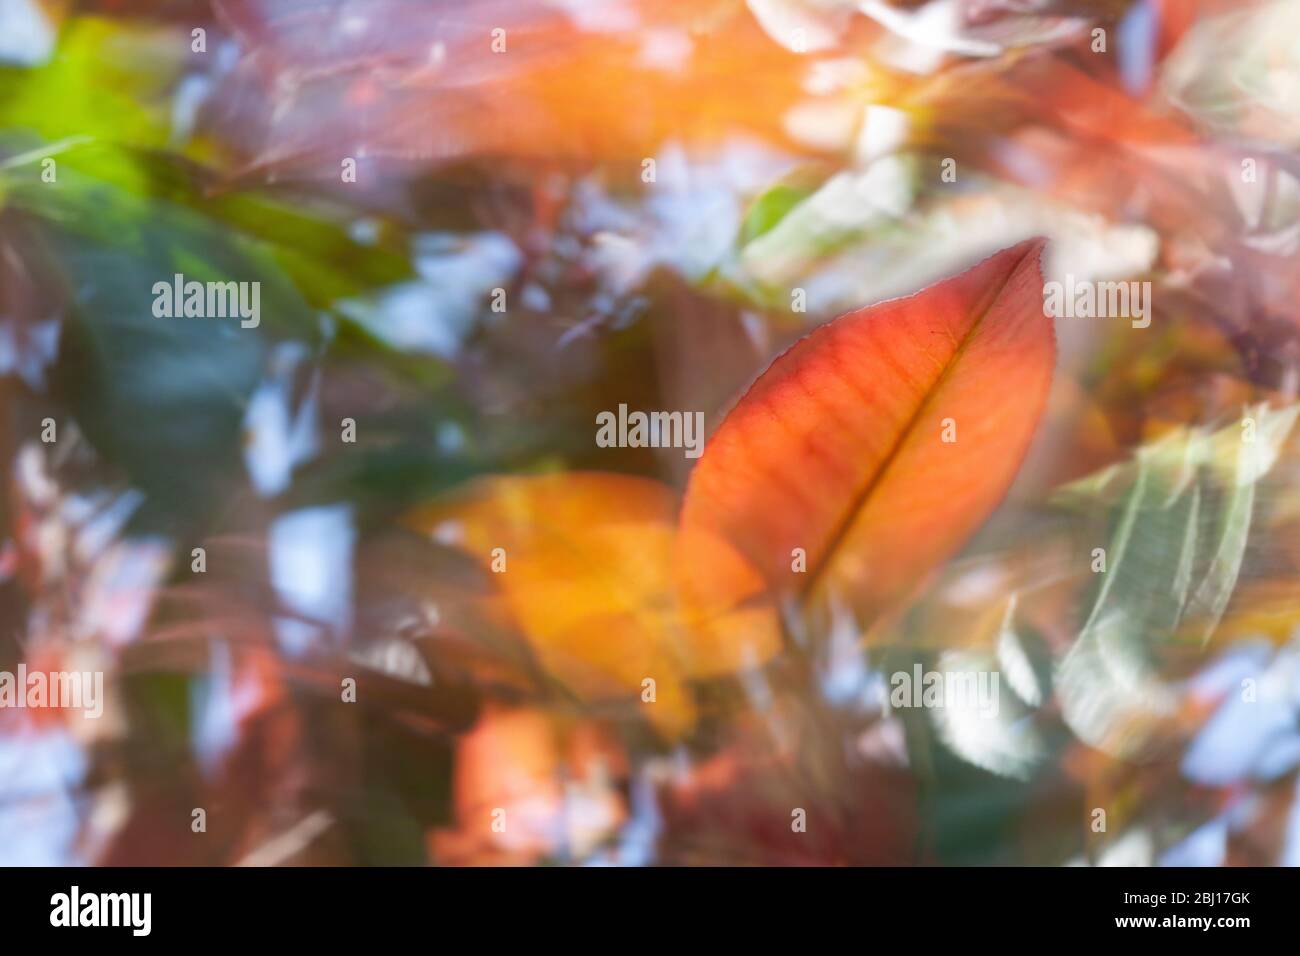 A Photinia Red Robin  (Photinia fraseri) with green, red, orange leaves moves in the wind with motion blur behind and a leaf in focus in the foregroun Stock Photo